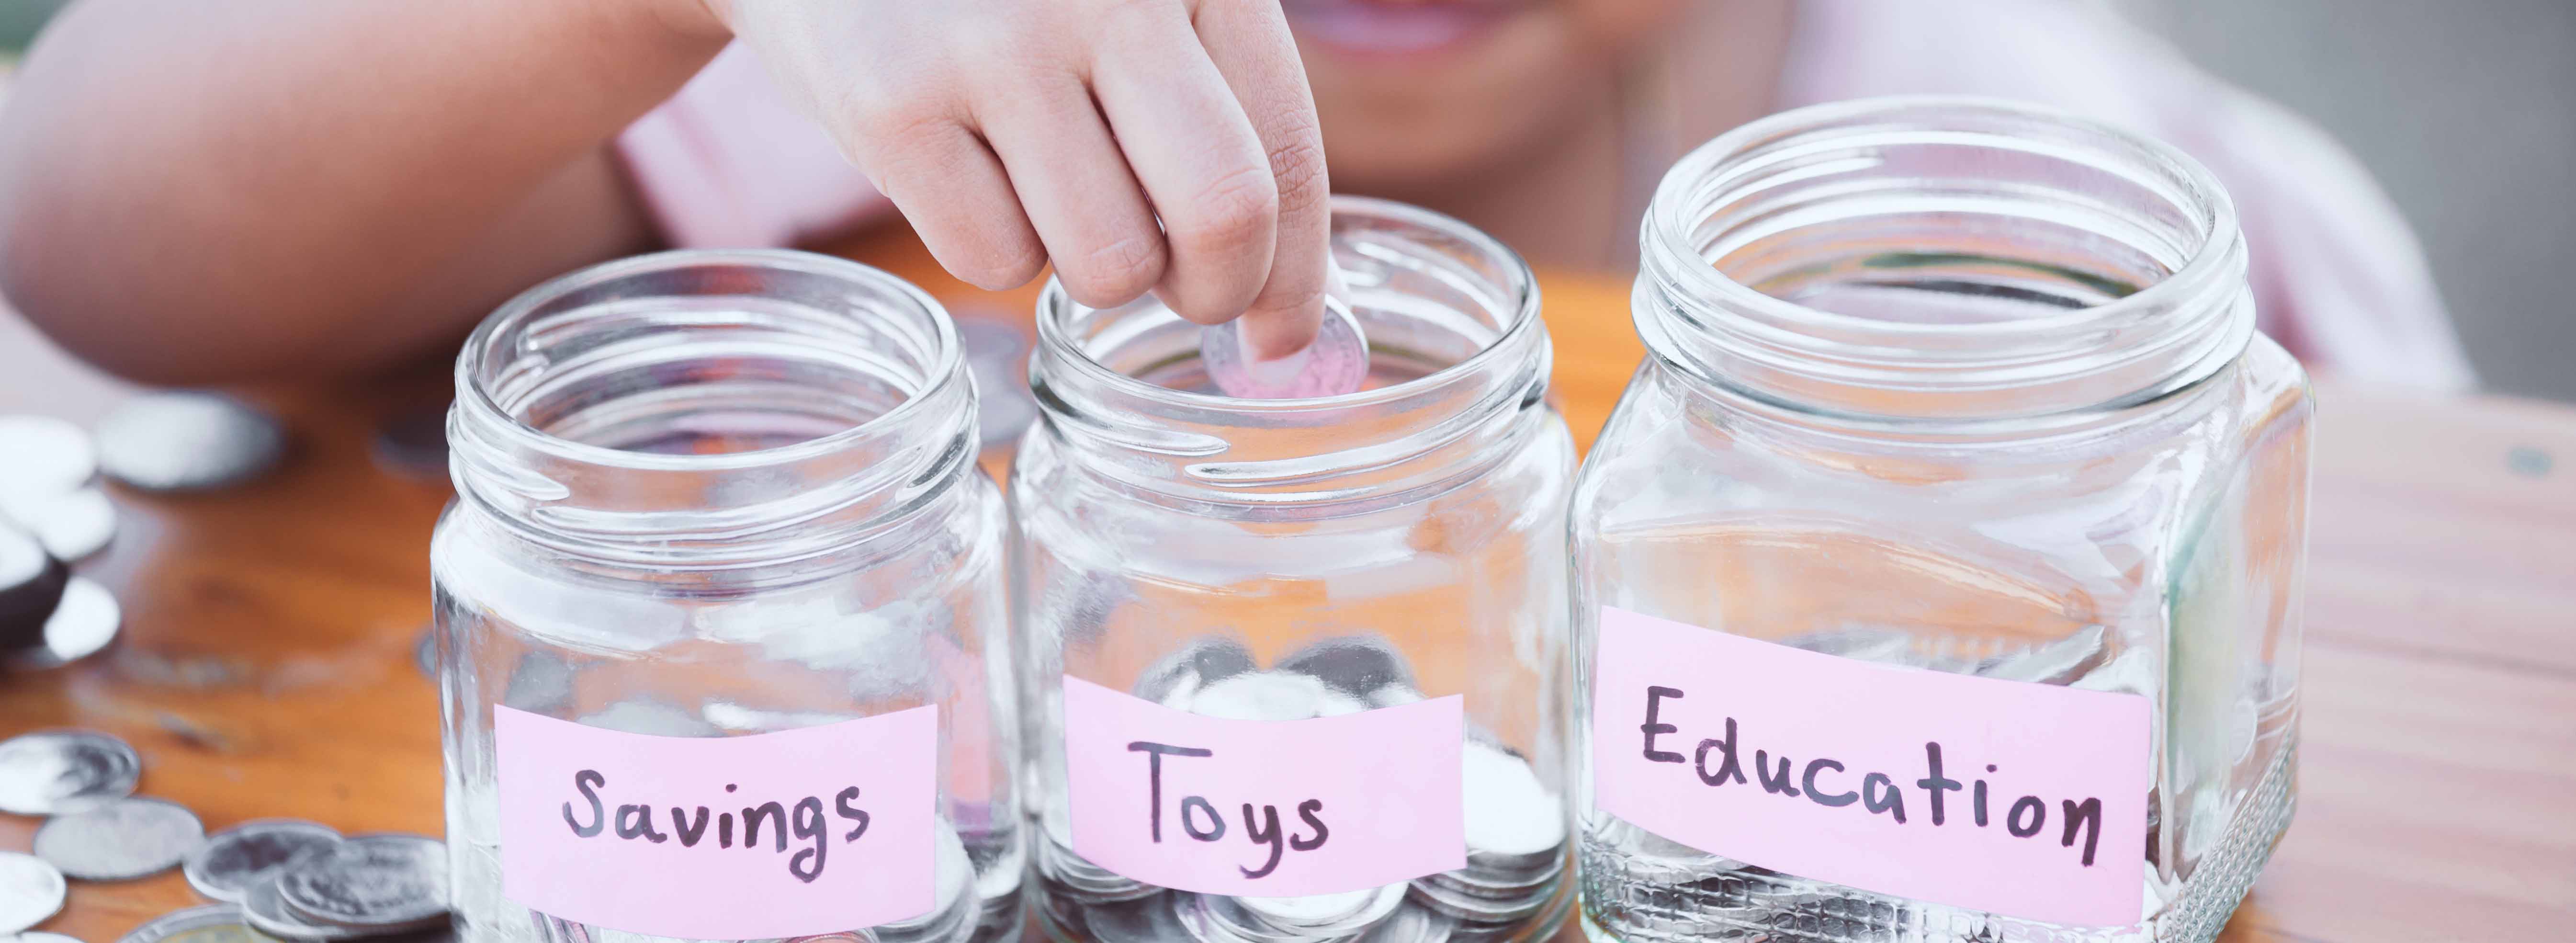 A young child placing coins in different piggy banks labeled toys